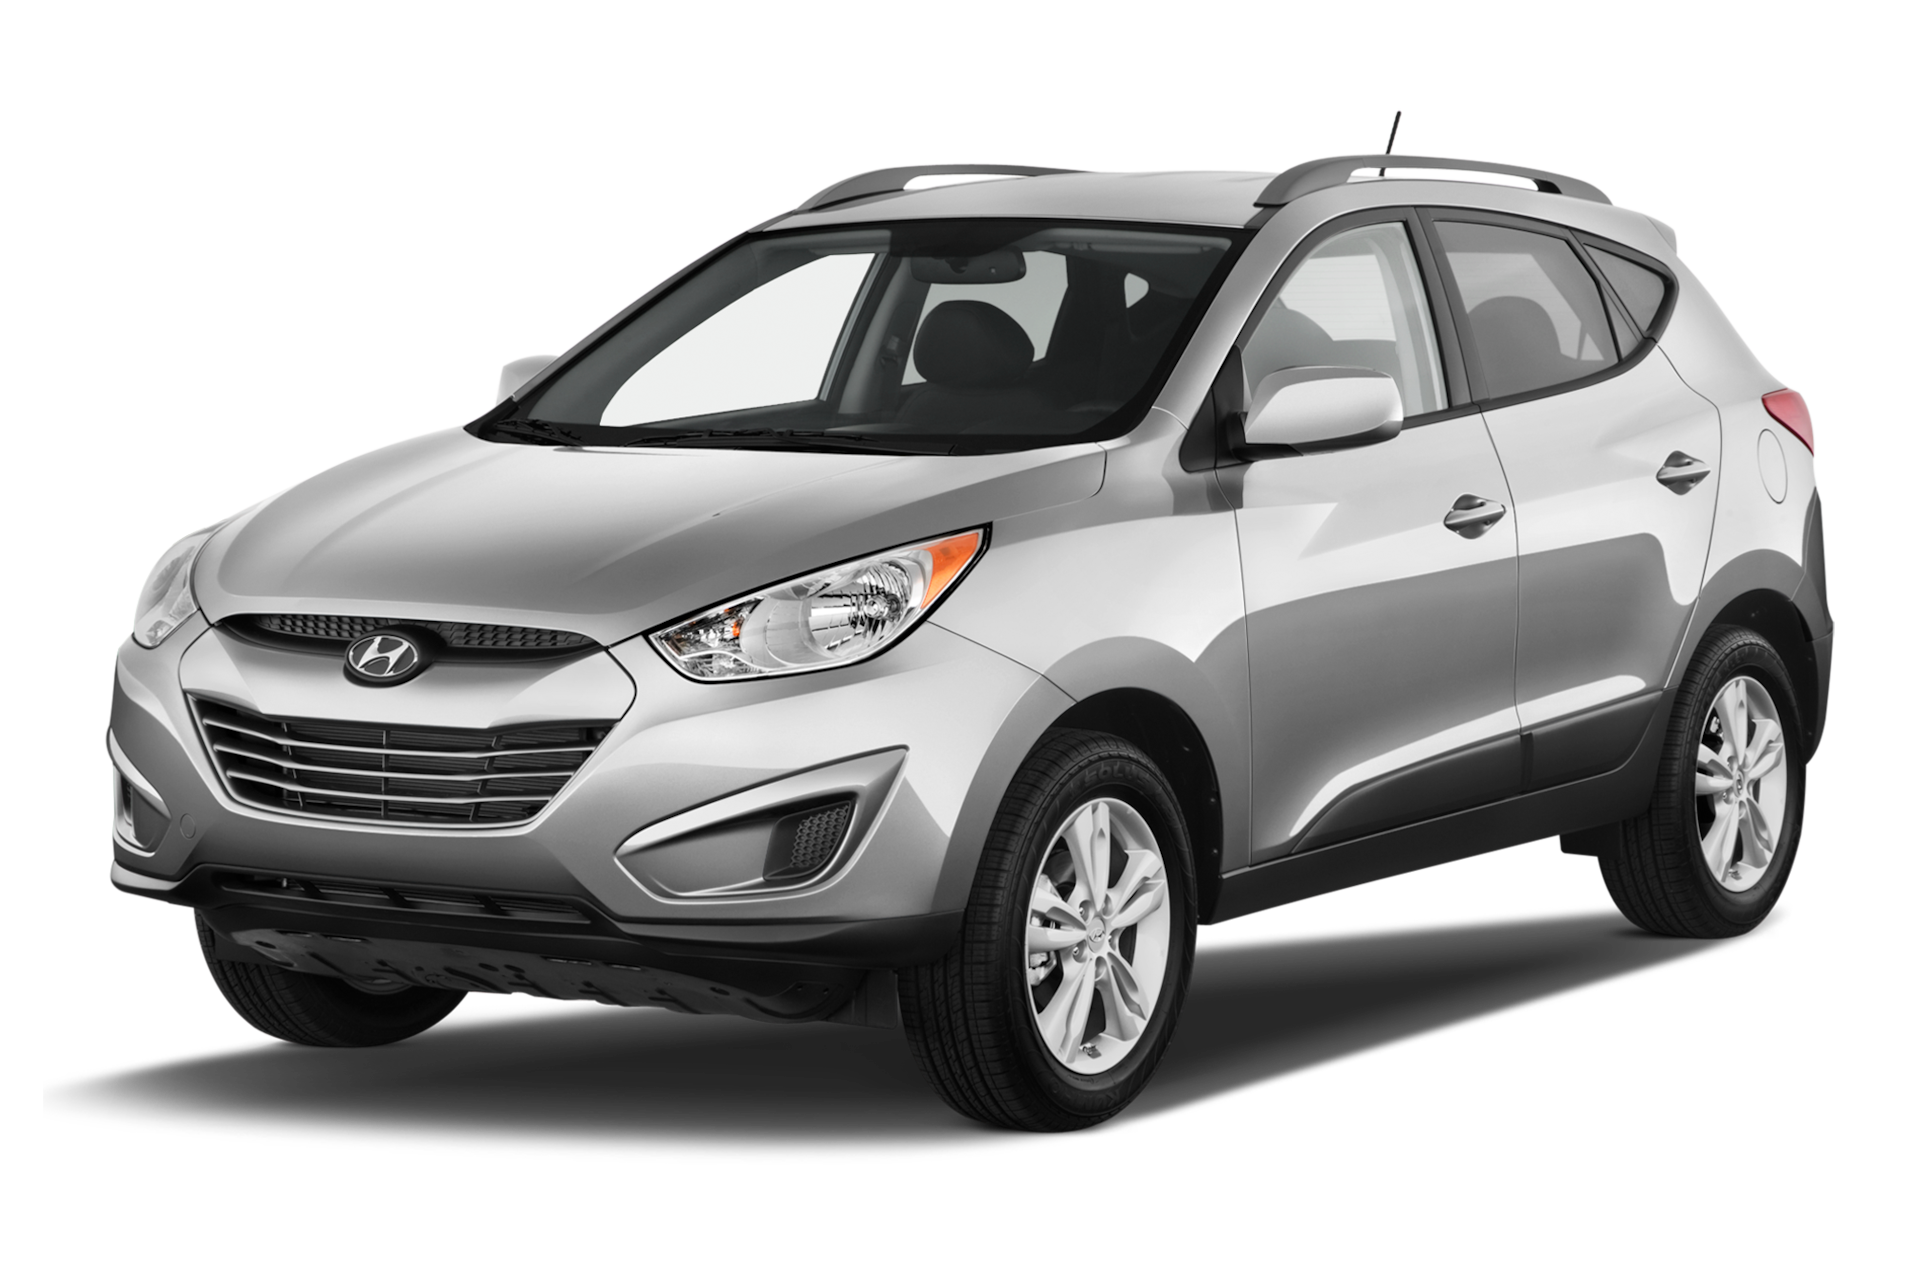 2011 Hyundai Tucson Prices, Reviews, and Photos - MotorTrend